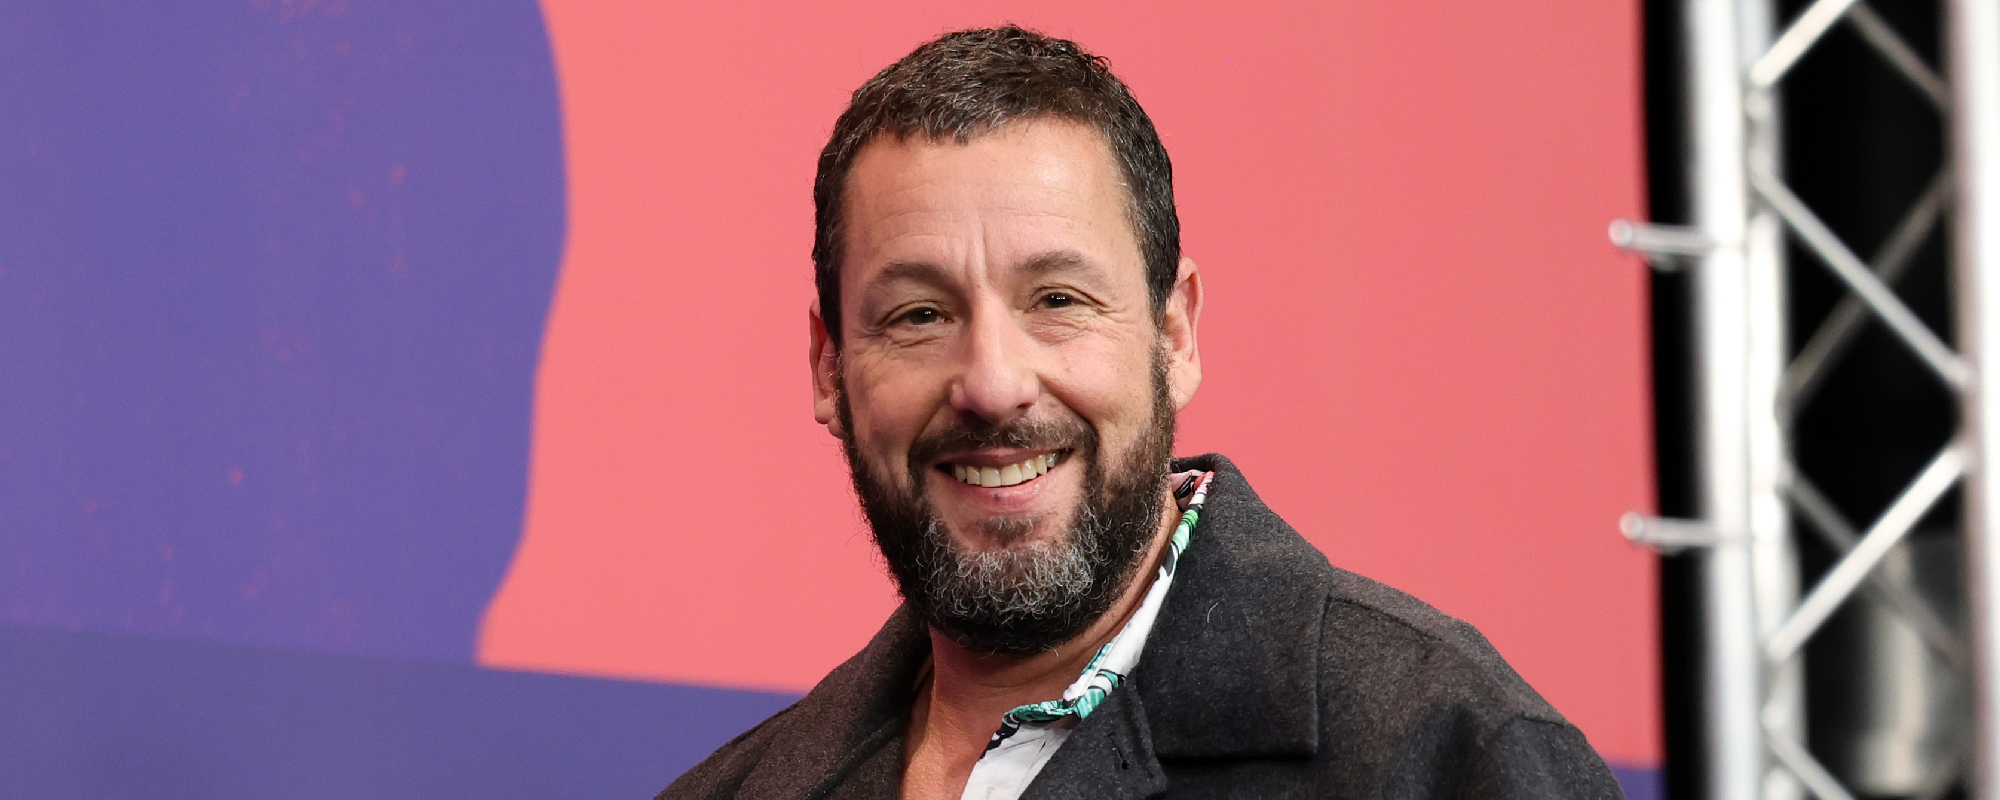 Adam Sandler Shares How ”Jumpy” He Gets Around Taylor Swift, Namedrops The Beatles